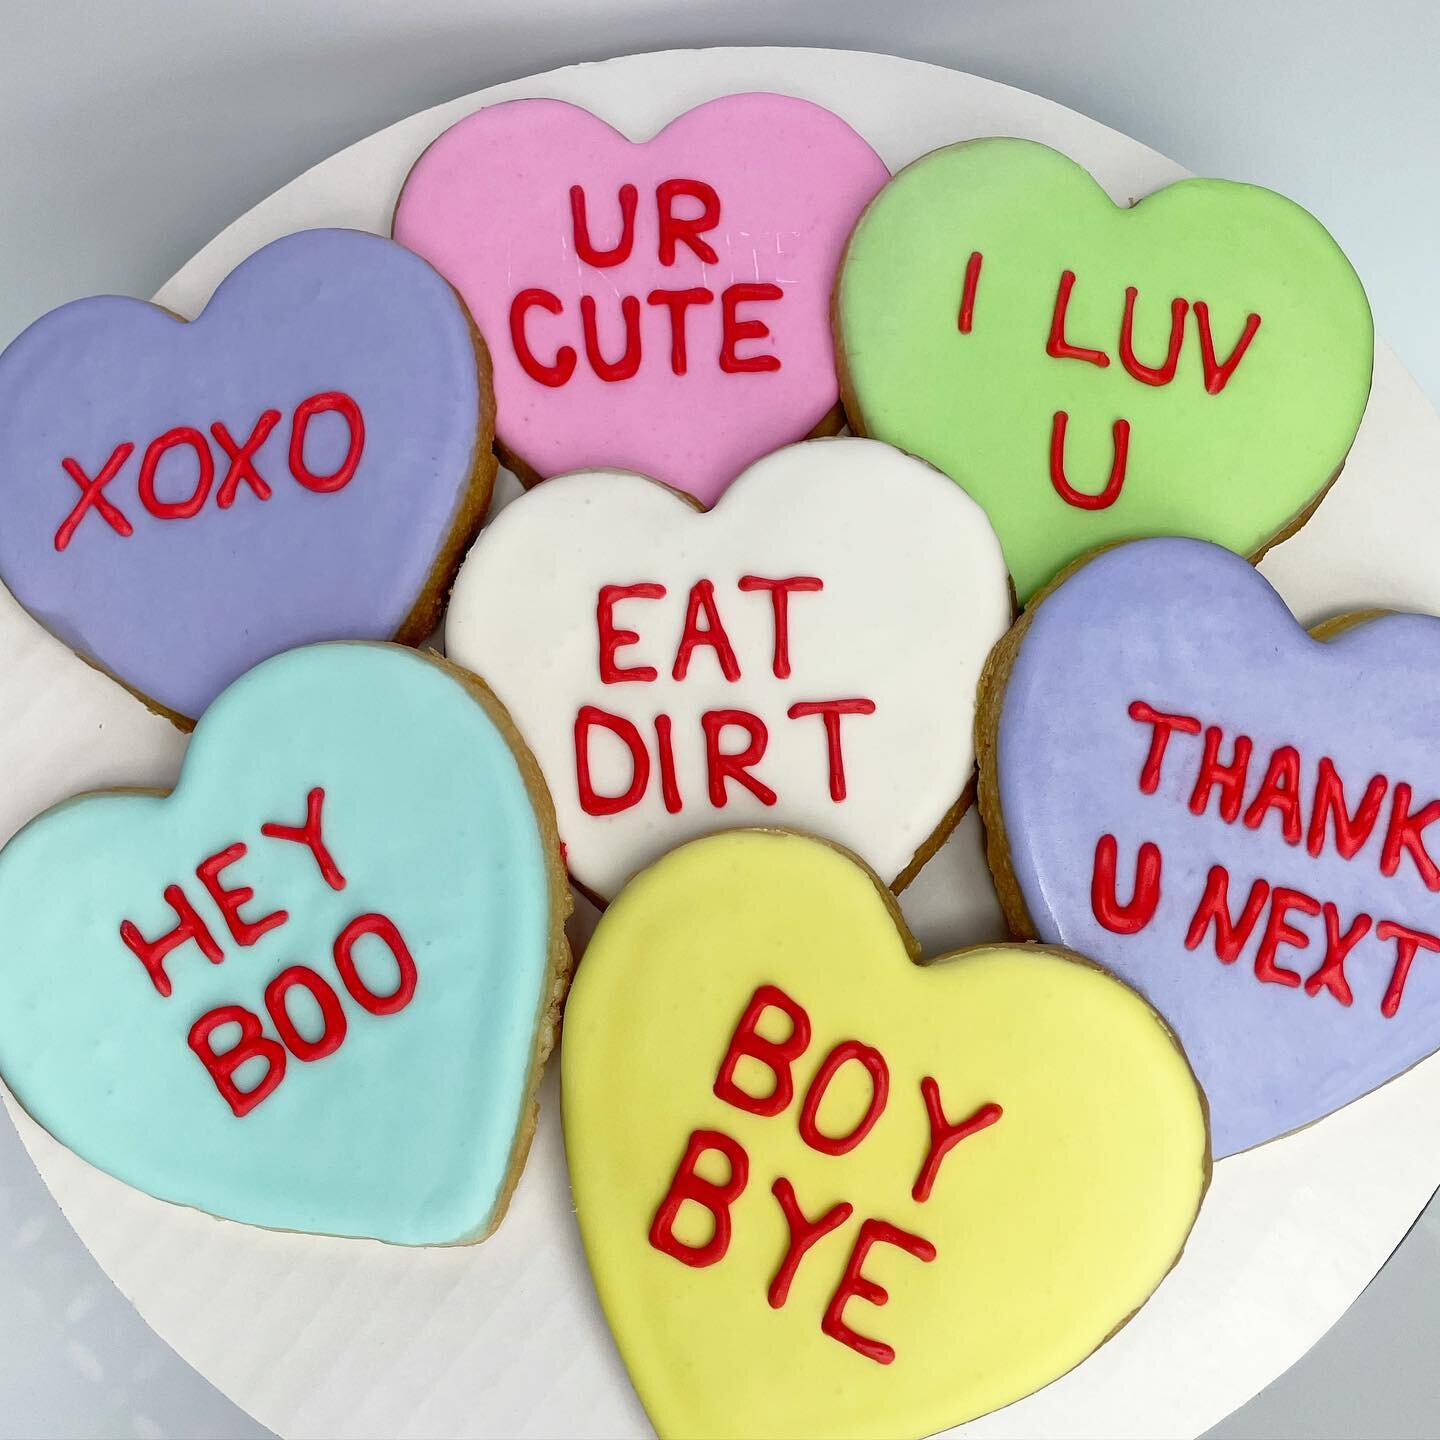 Nice mix of salty and sweet? 🤣
It&rsquo;s almost #valentinesday and these conversation heart sugar cookies are a delicious way to celebrate. 

#cookies #cookiesofig #cookiesofinstagram #sugarcookies #decoratedcookies #valentine #valentines #valentin